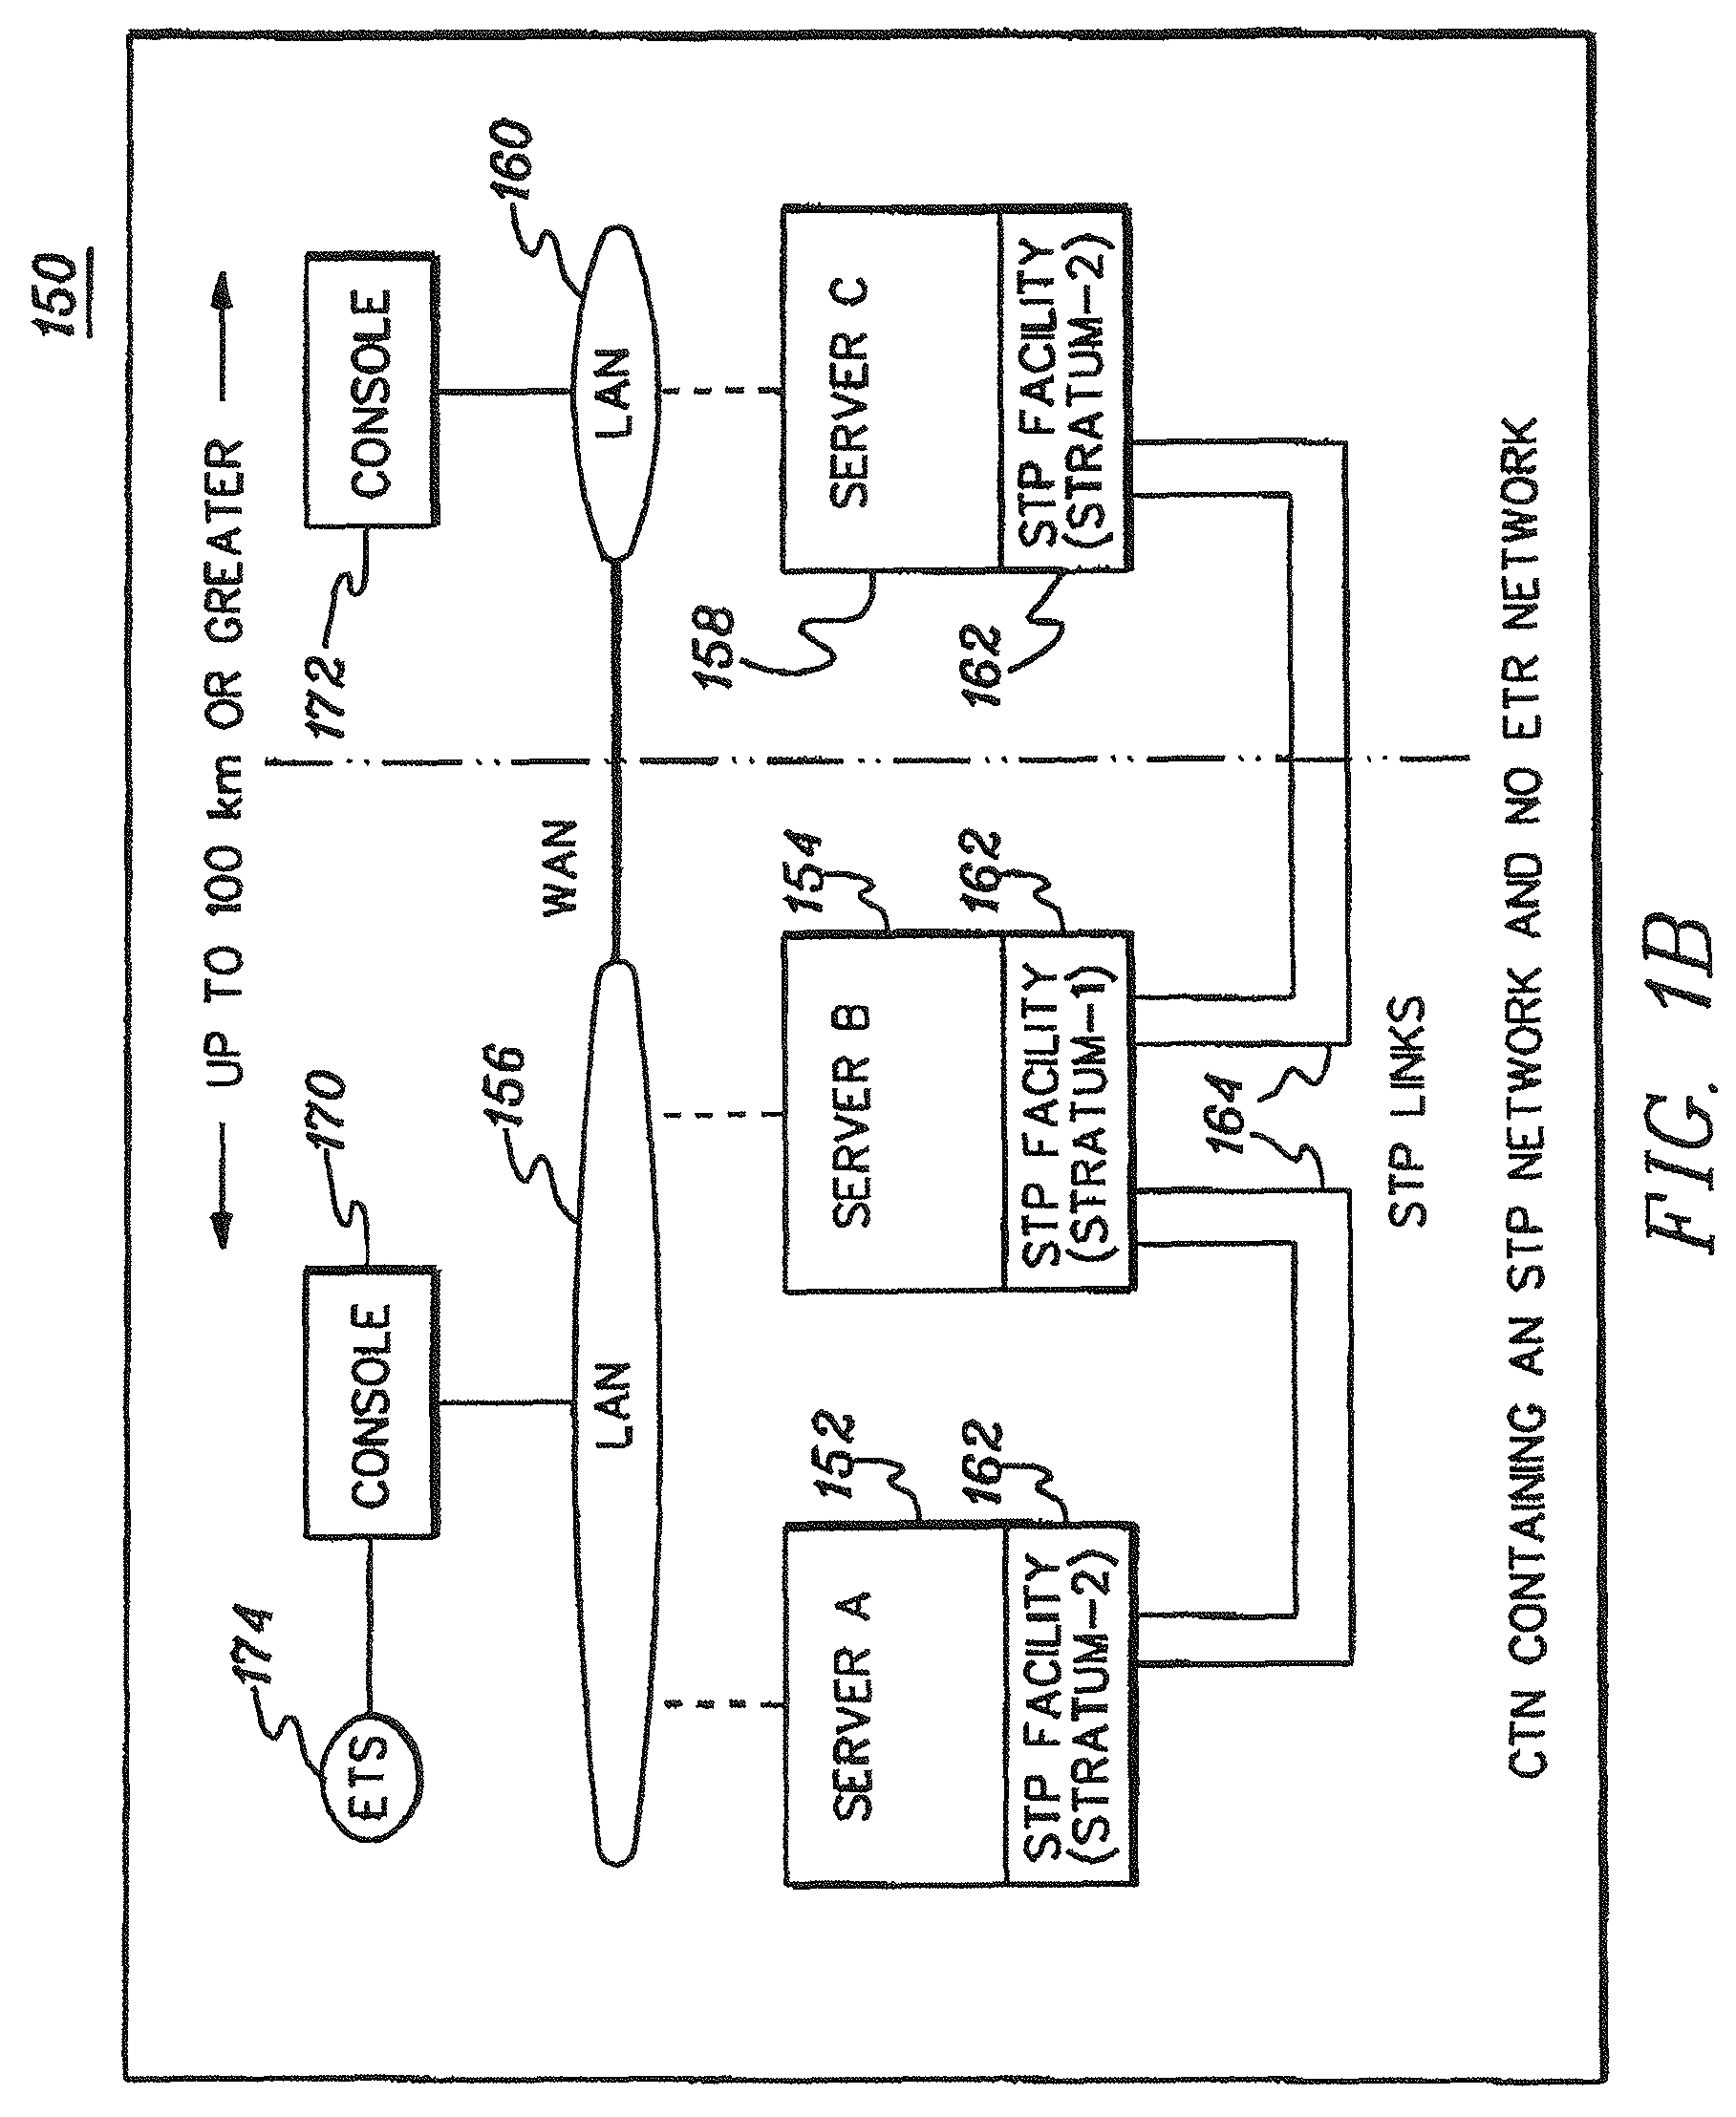 Facilitating recovery in a coordinated timing network